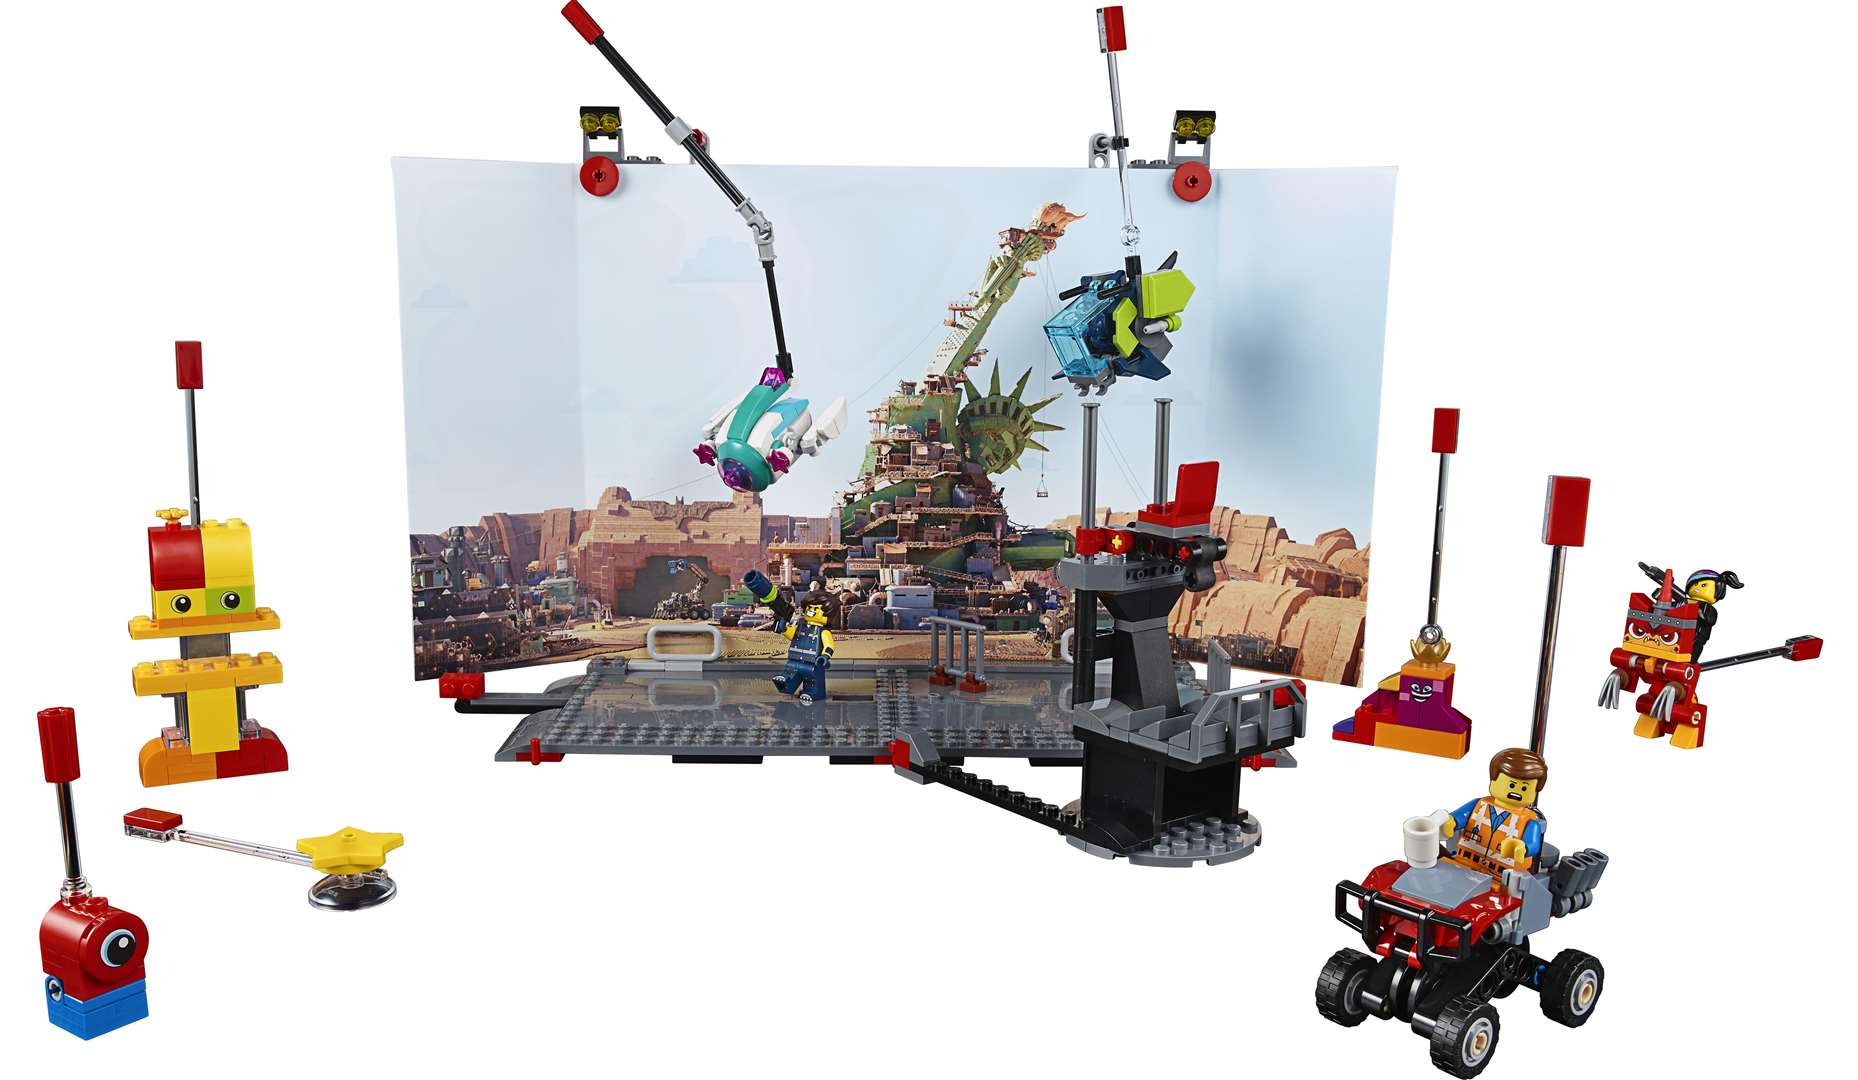 LEGO once again features in a Top Toys list